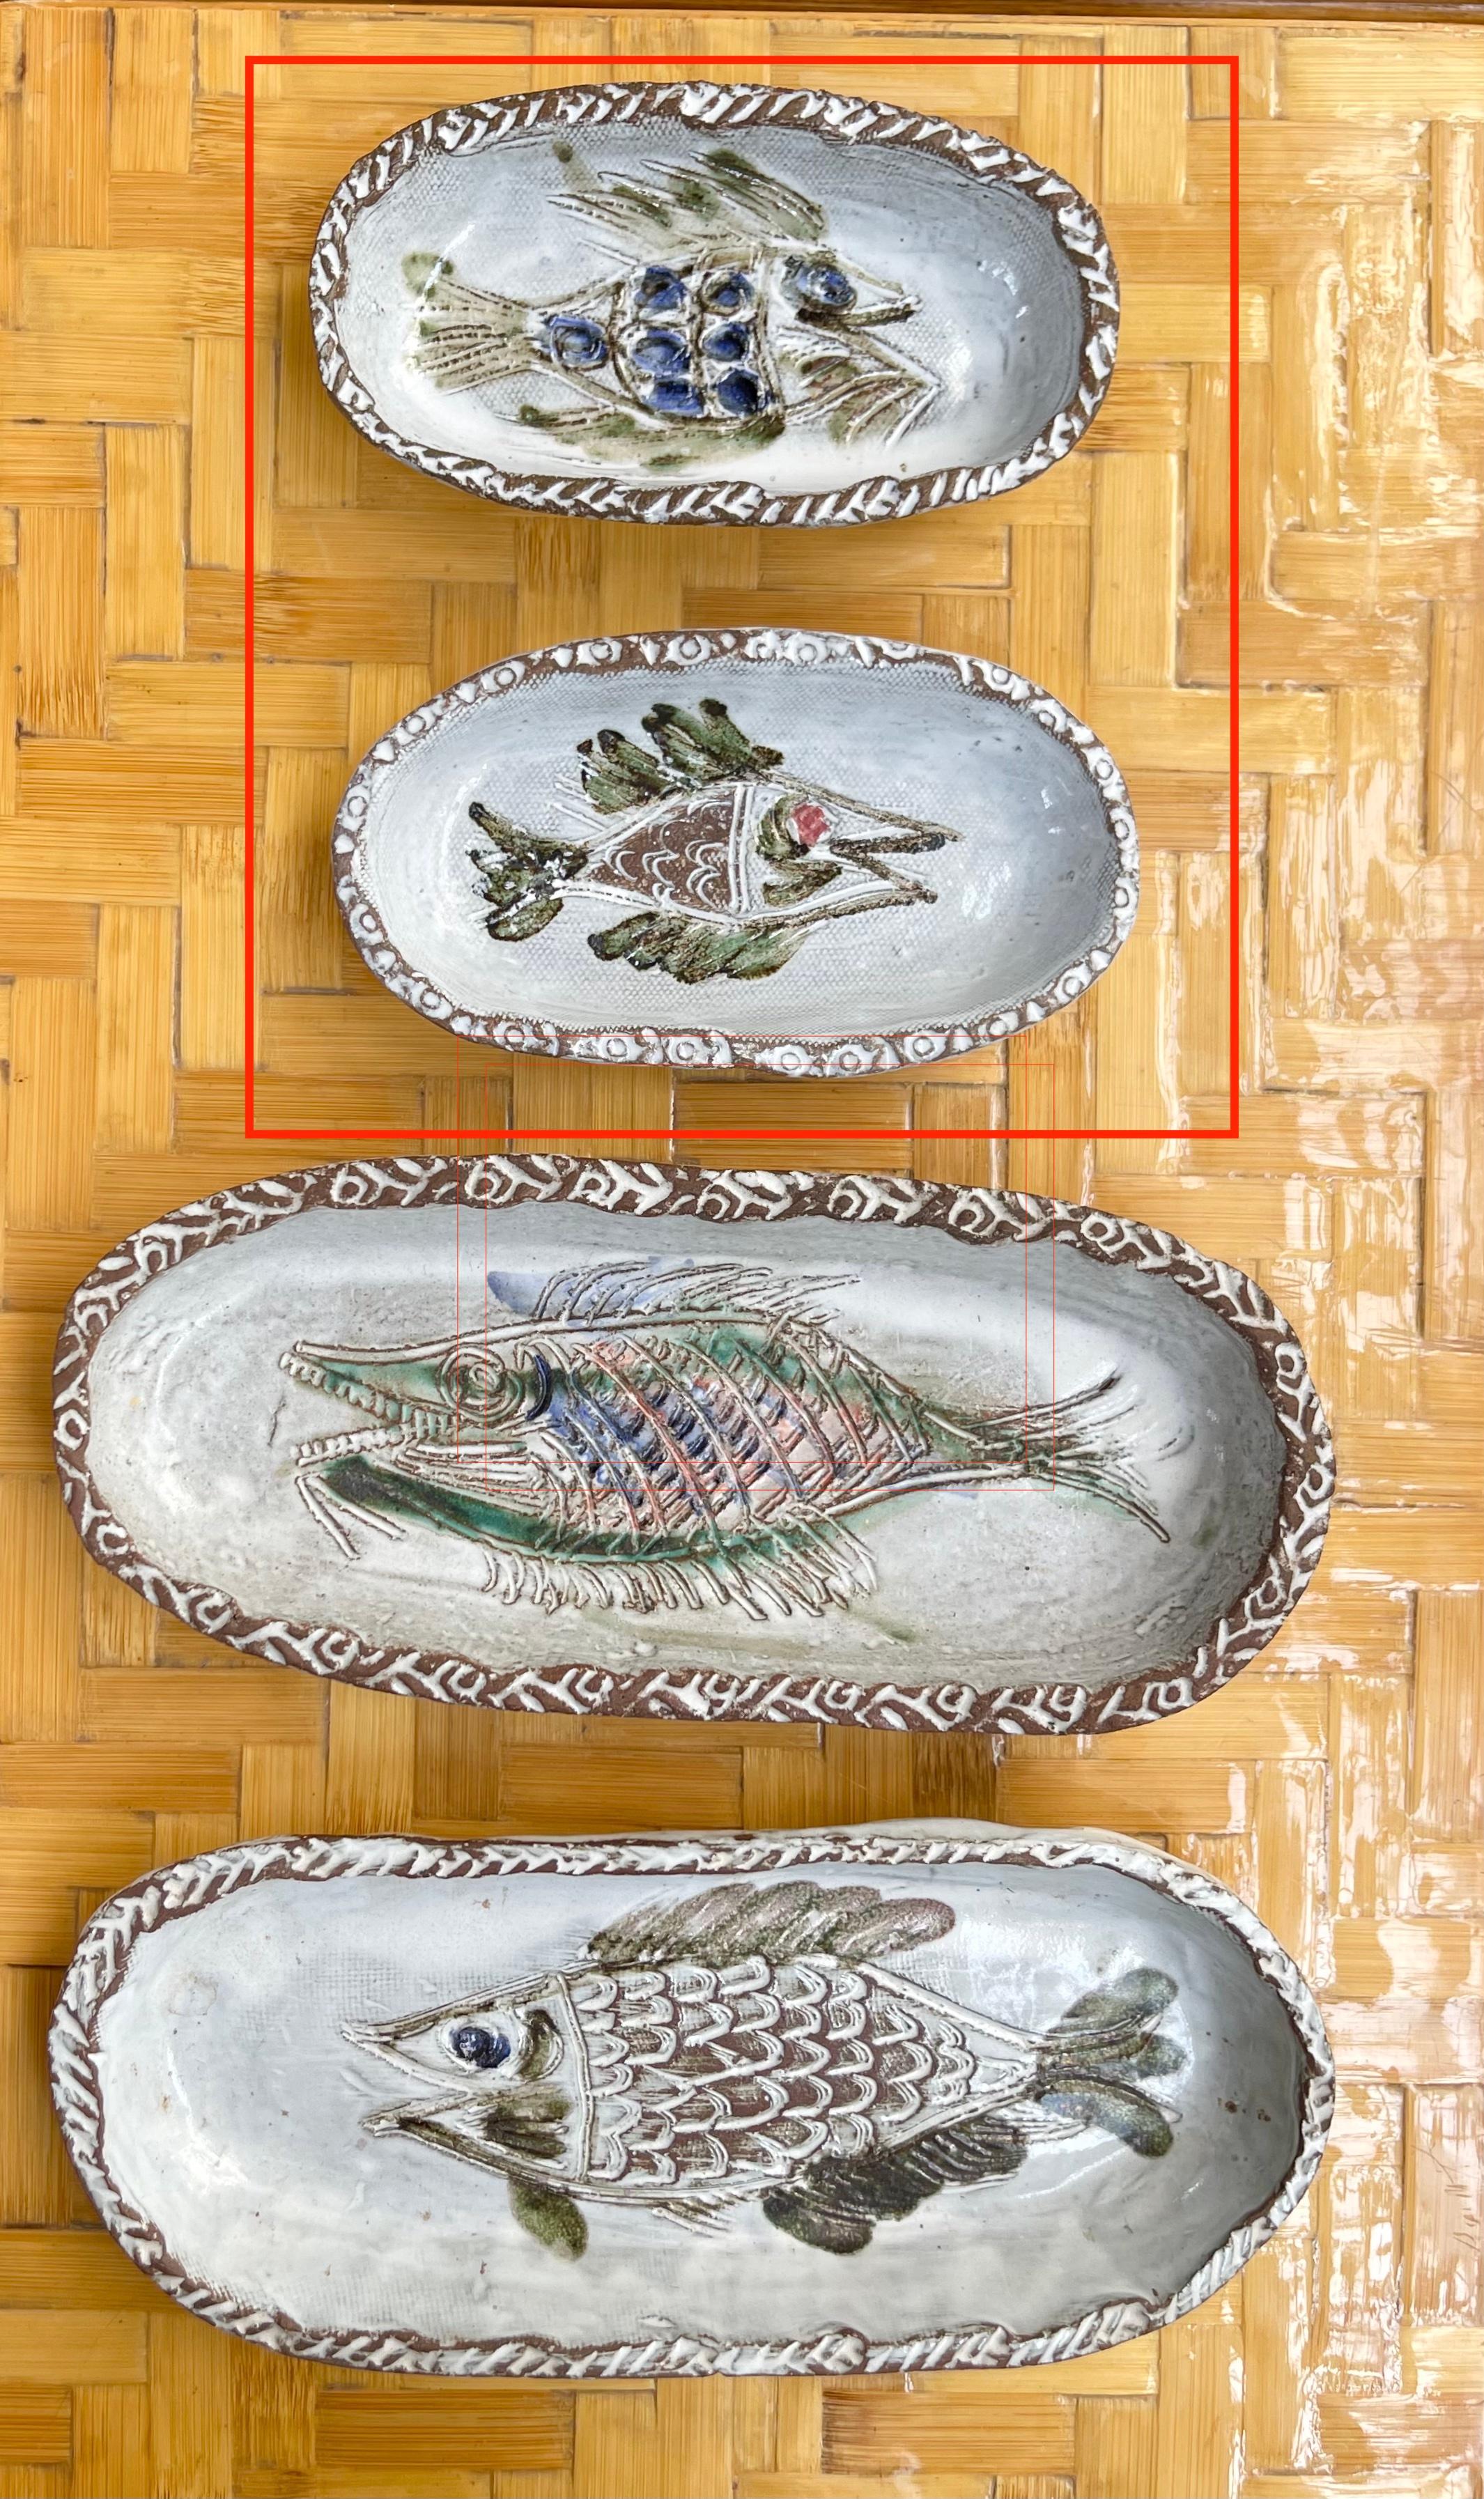 A pair of French ceramic decorative dishes with fish motif (circa 1970s) by Albert Thiry. Two oval-shaped ceramic dishes have a chalk-white glazed surface. Within the dishes' recesses a fish is incised into the glaze and painted in Thiry's trademark